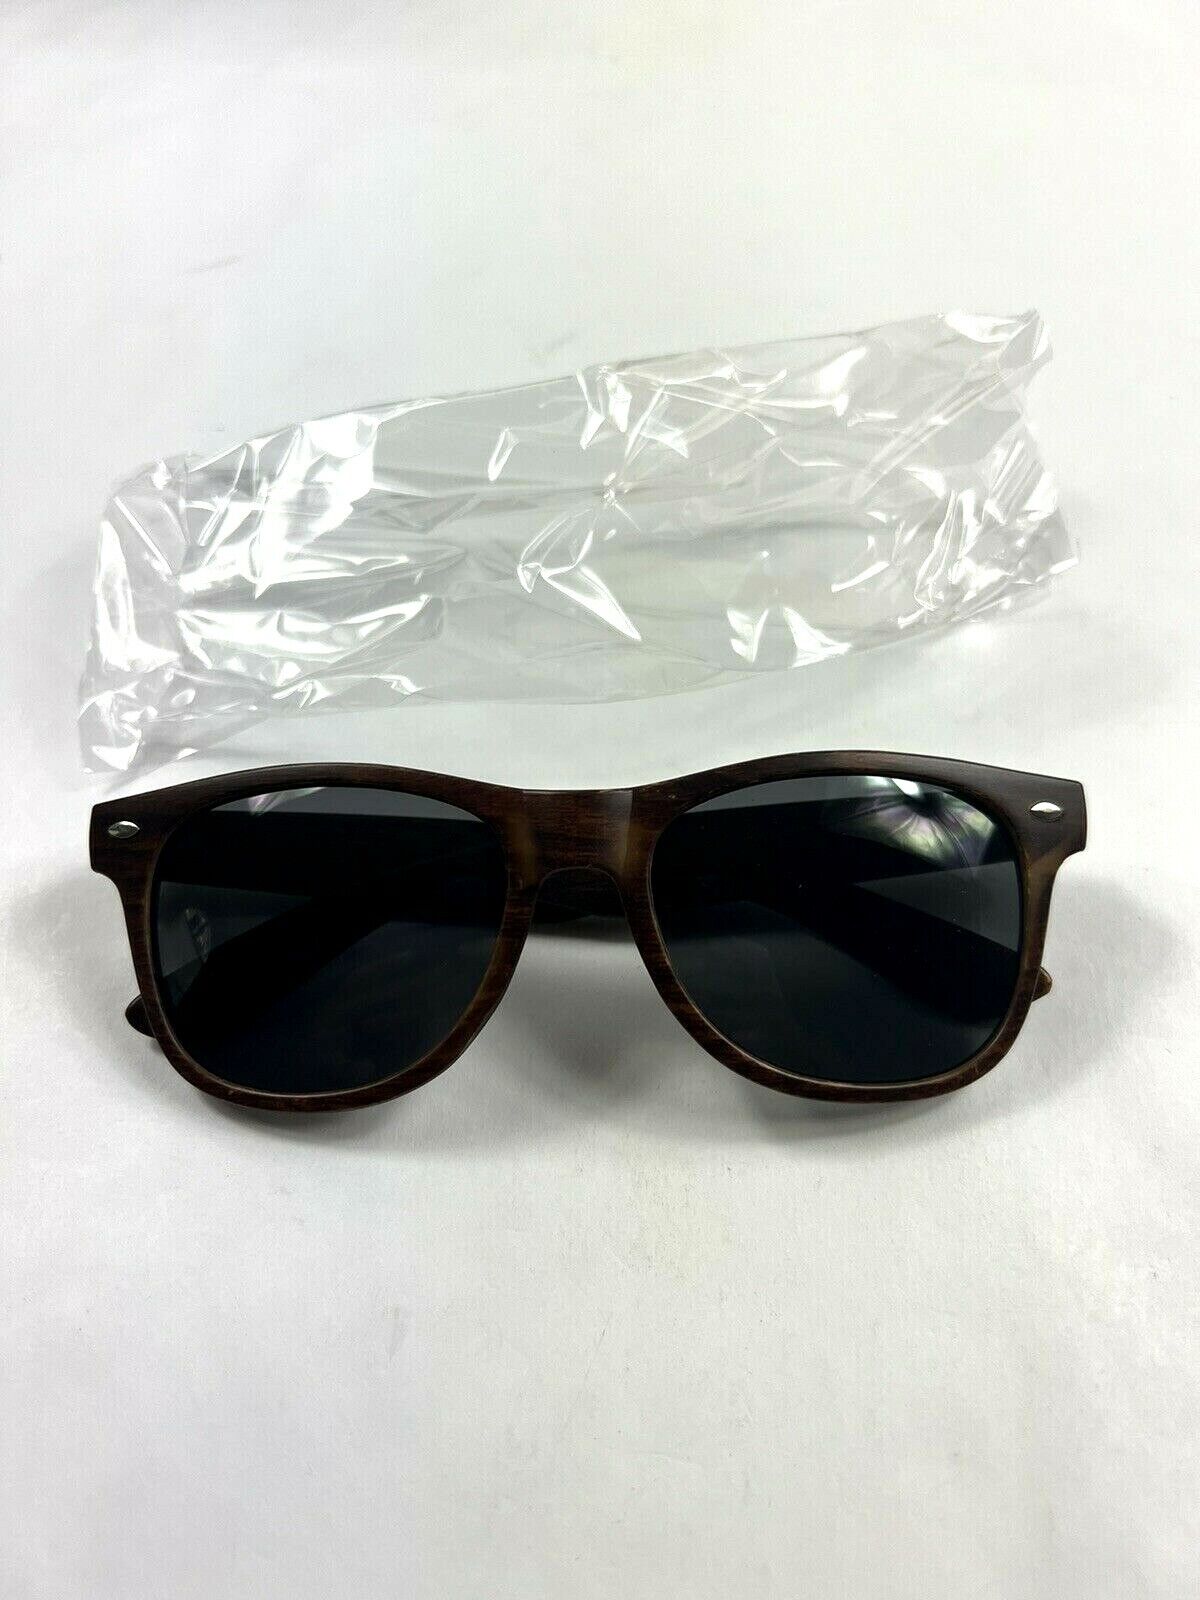 CASAMIGOS SUNGLASSES PLASTIC WOOD Brand New George Clooney Tequila